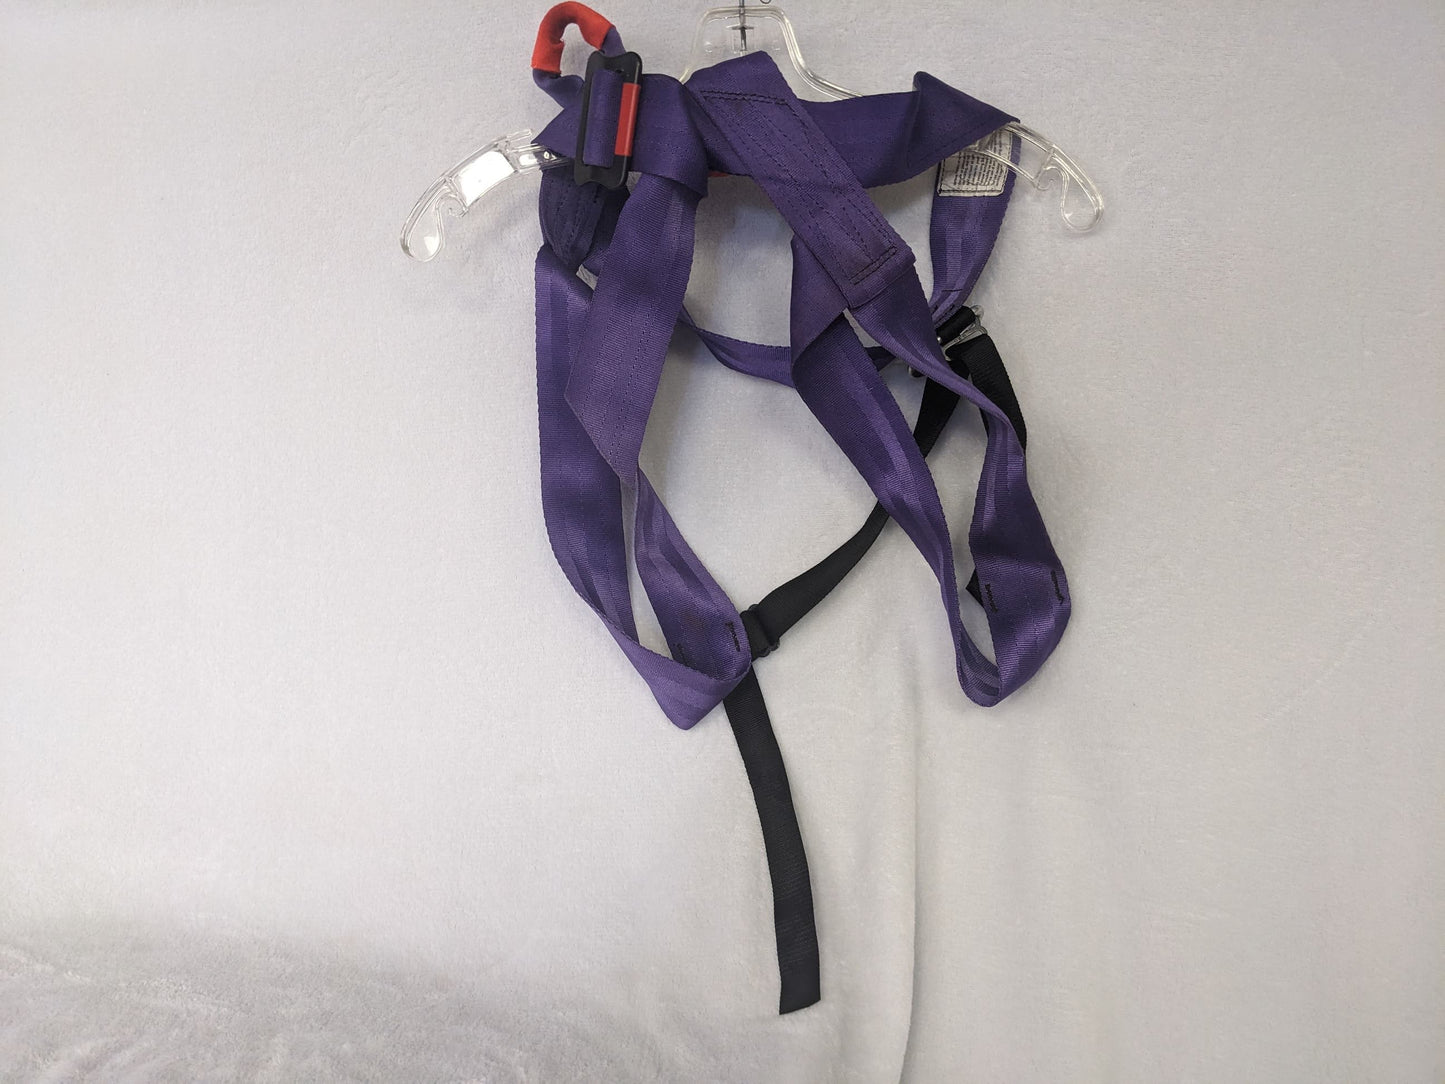 Bluewater Climbing Harness Size Large Color Purple Condition Used